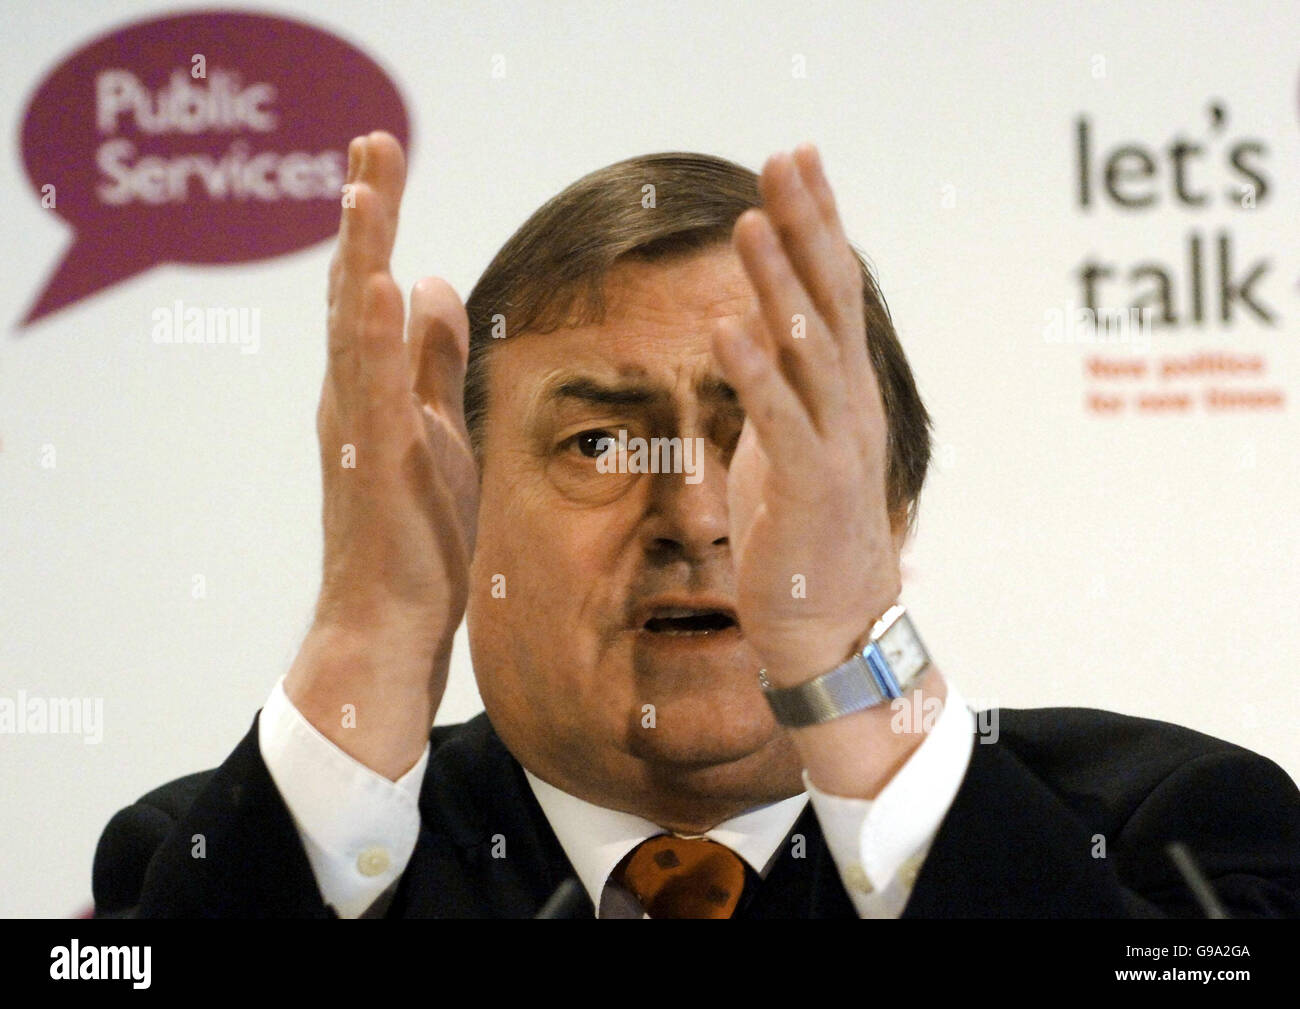 Deputy Prime Minister John Prescott speaks to public service leaders and workers at the launch of the Labour Party's new 'Lets Talk' initiative in London today. Stock Photo